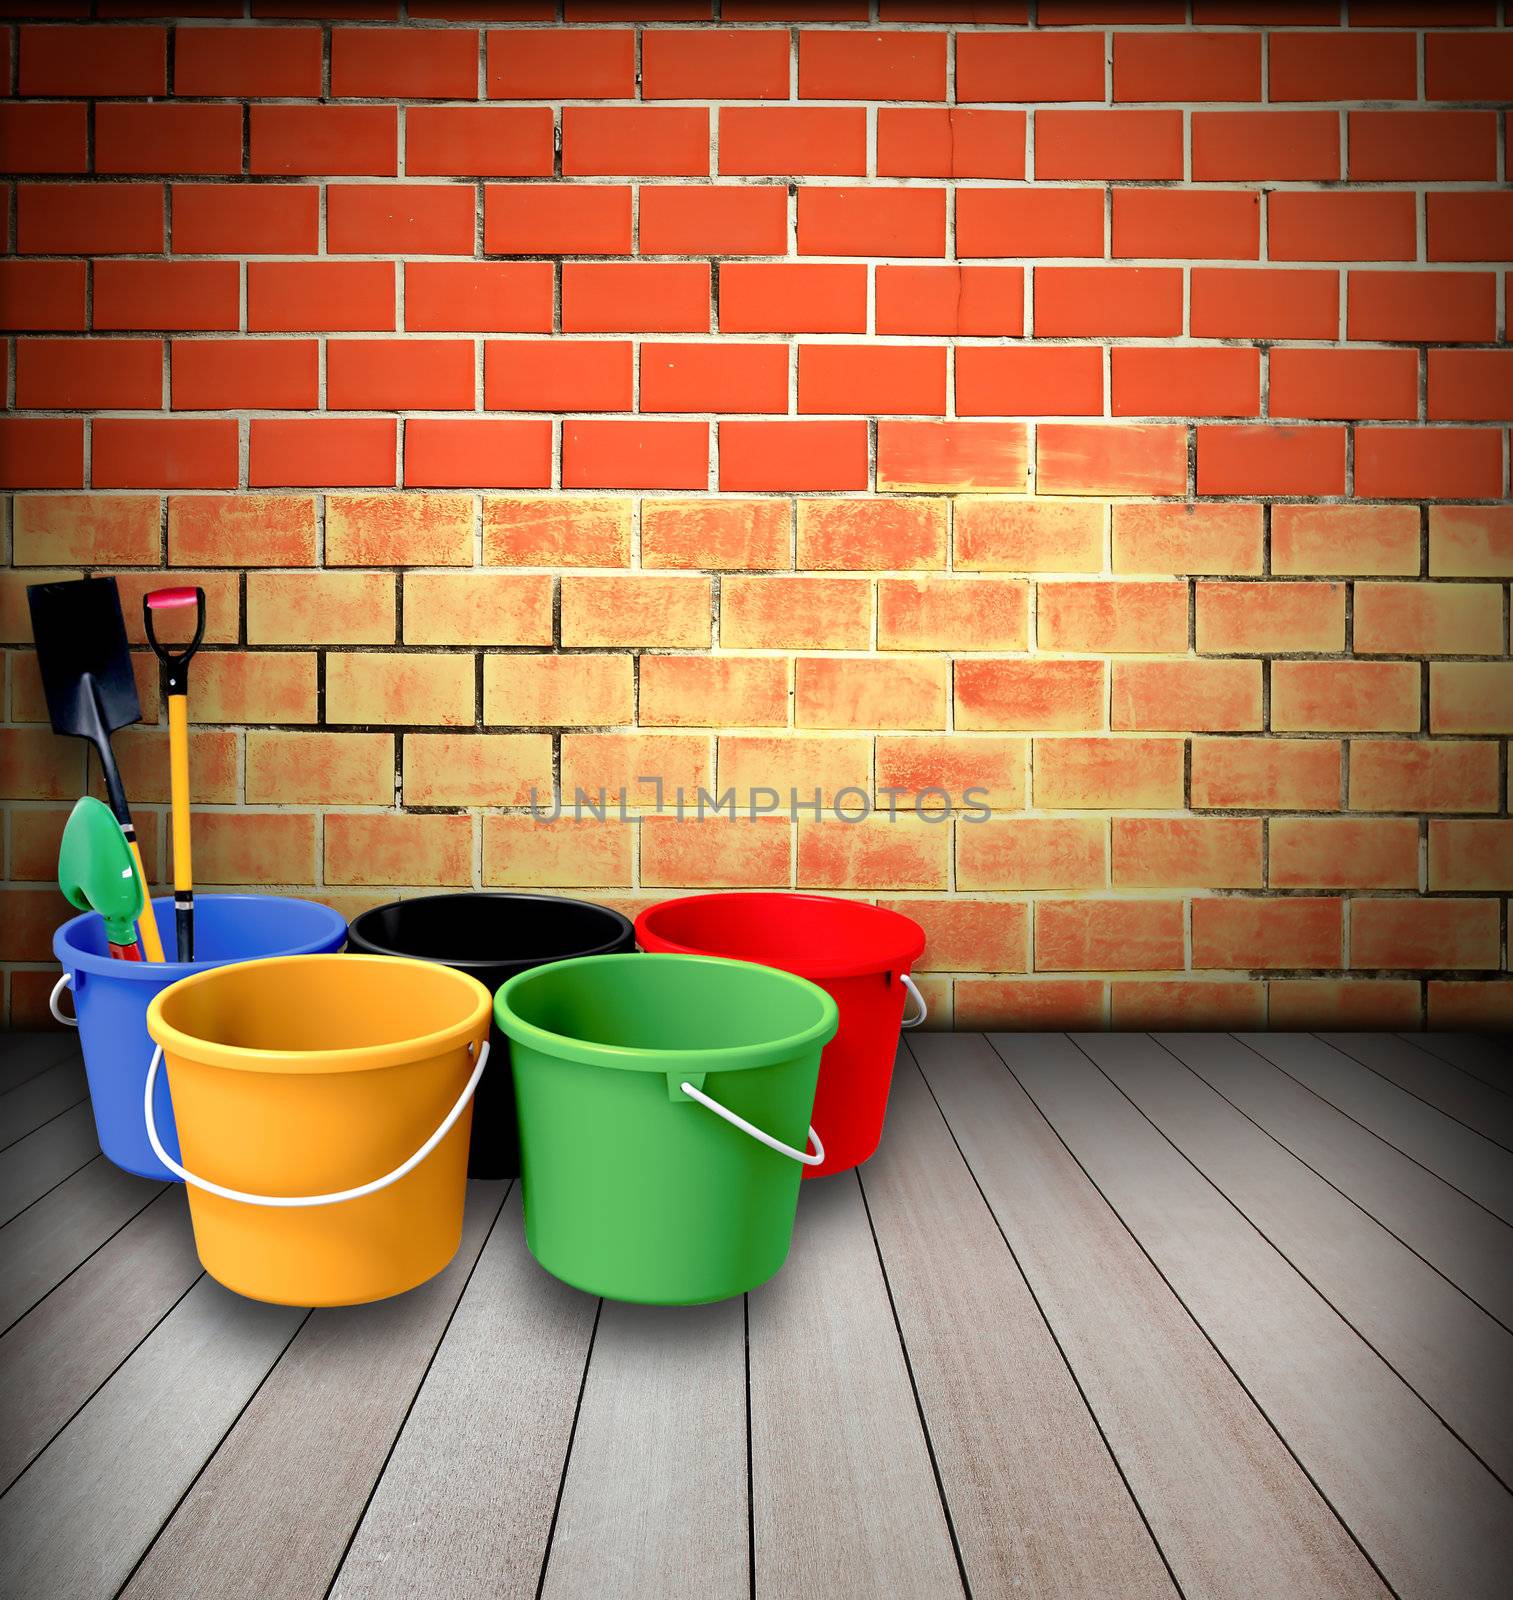 Bucket and shovel with a brick wall.